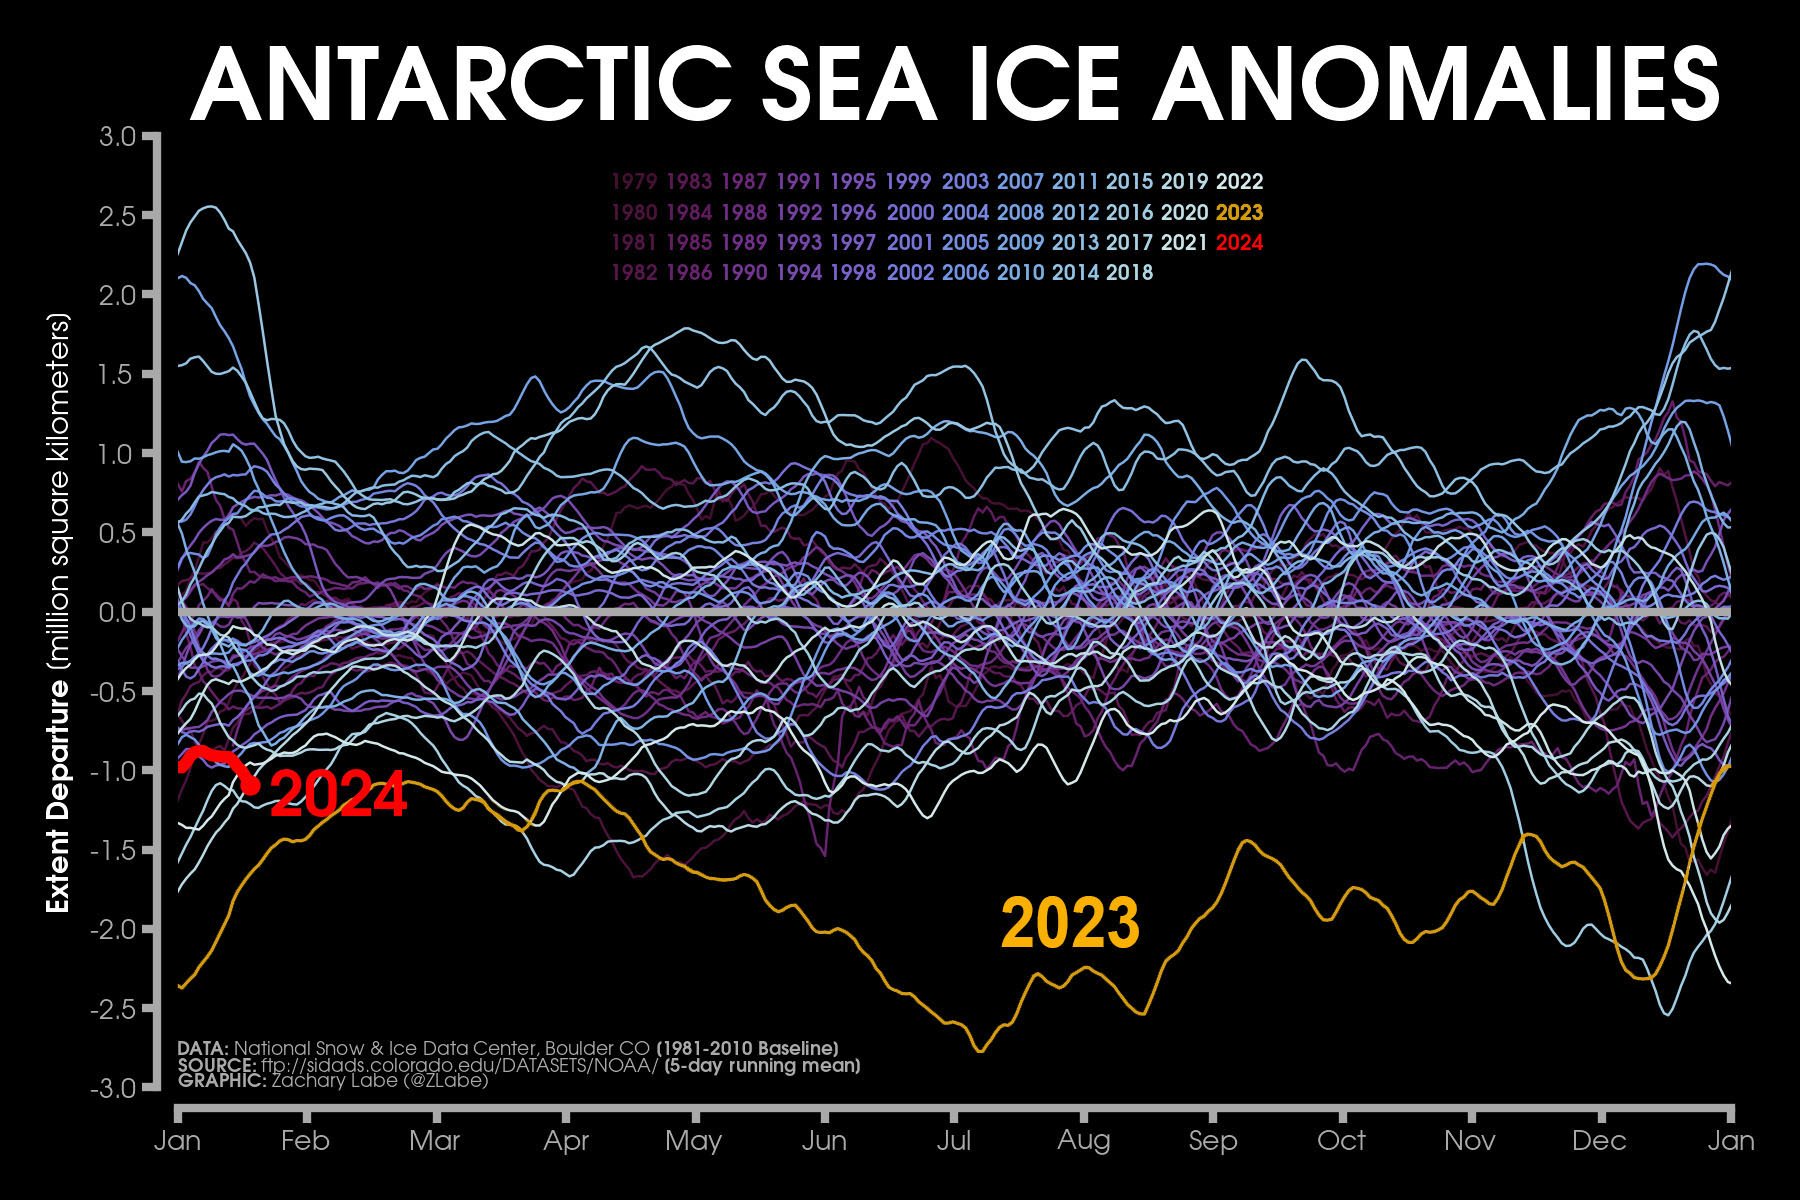 Fig. 1: 2023 saw a catastrophic decline in Antarctic sea ice formation. Image: Zack Labe